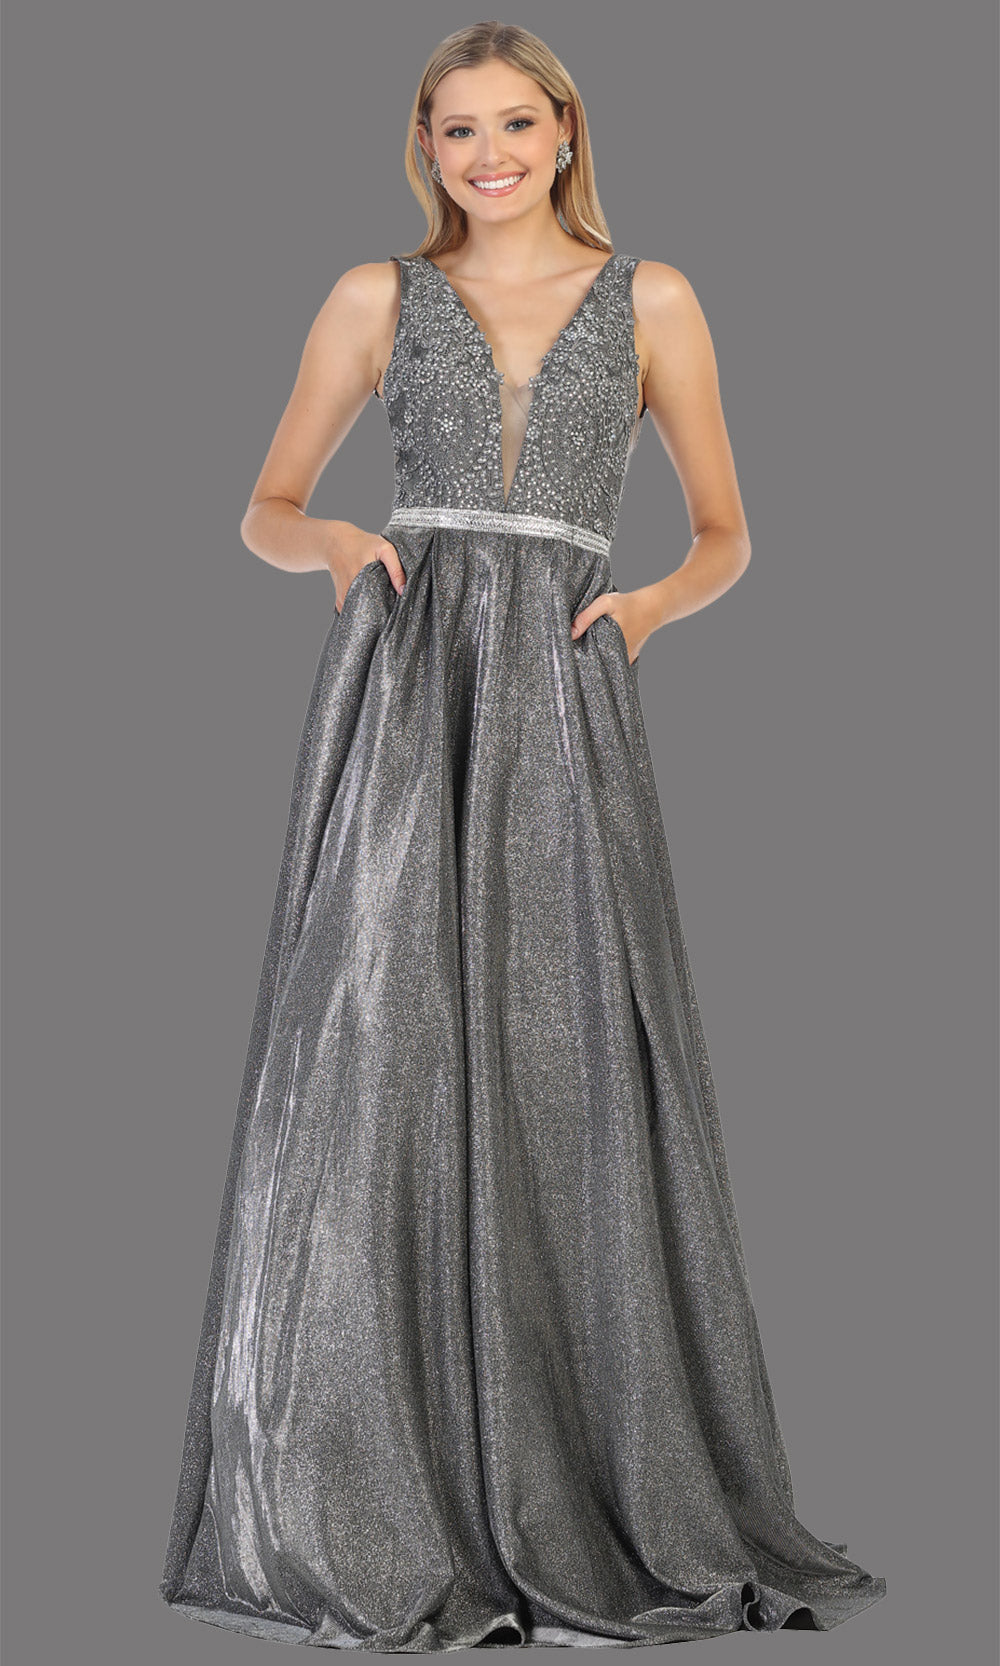 Mayqueen RQ7790 long charcoal v neck flowy metallic glitter dress. Perfect dark grey dress for prom, engagement dress, e-shoot dress, formal wedding guest dress, debut, quinceanera, sweet 16, gala. Plus sizes avail in this light blue semi ballgown.jpg